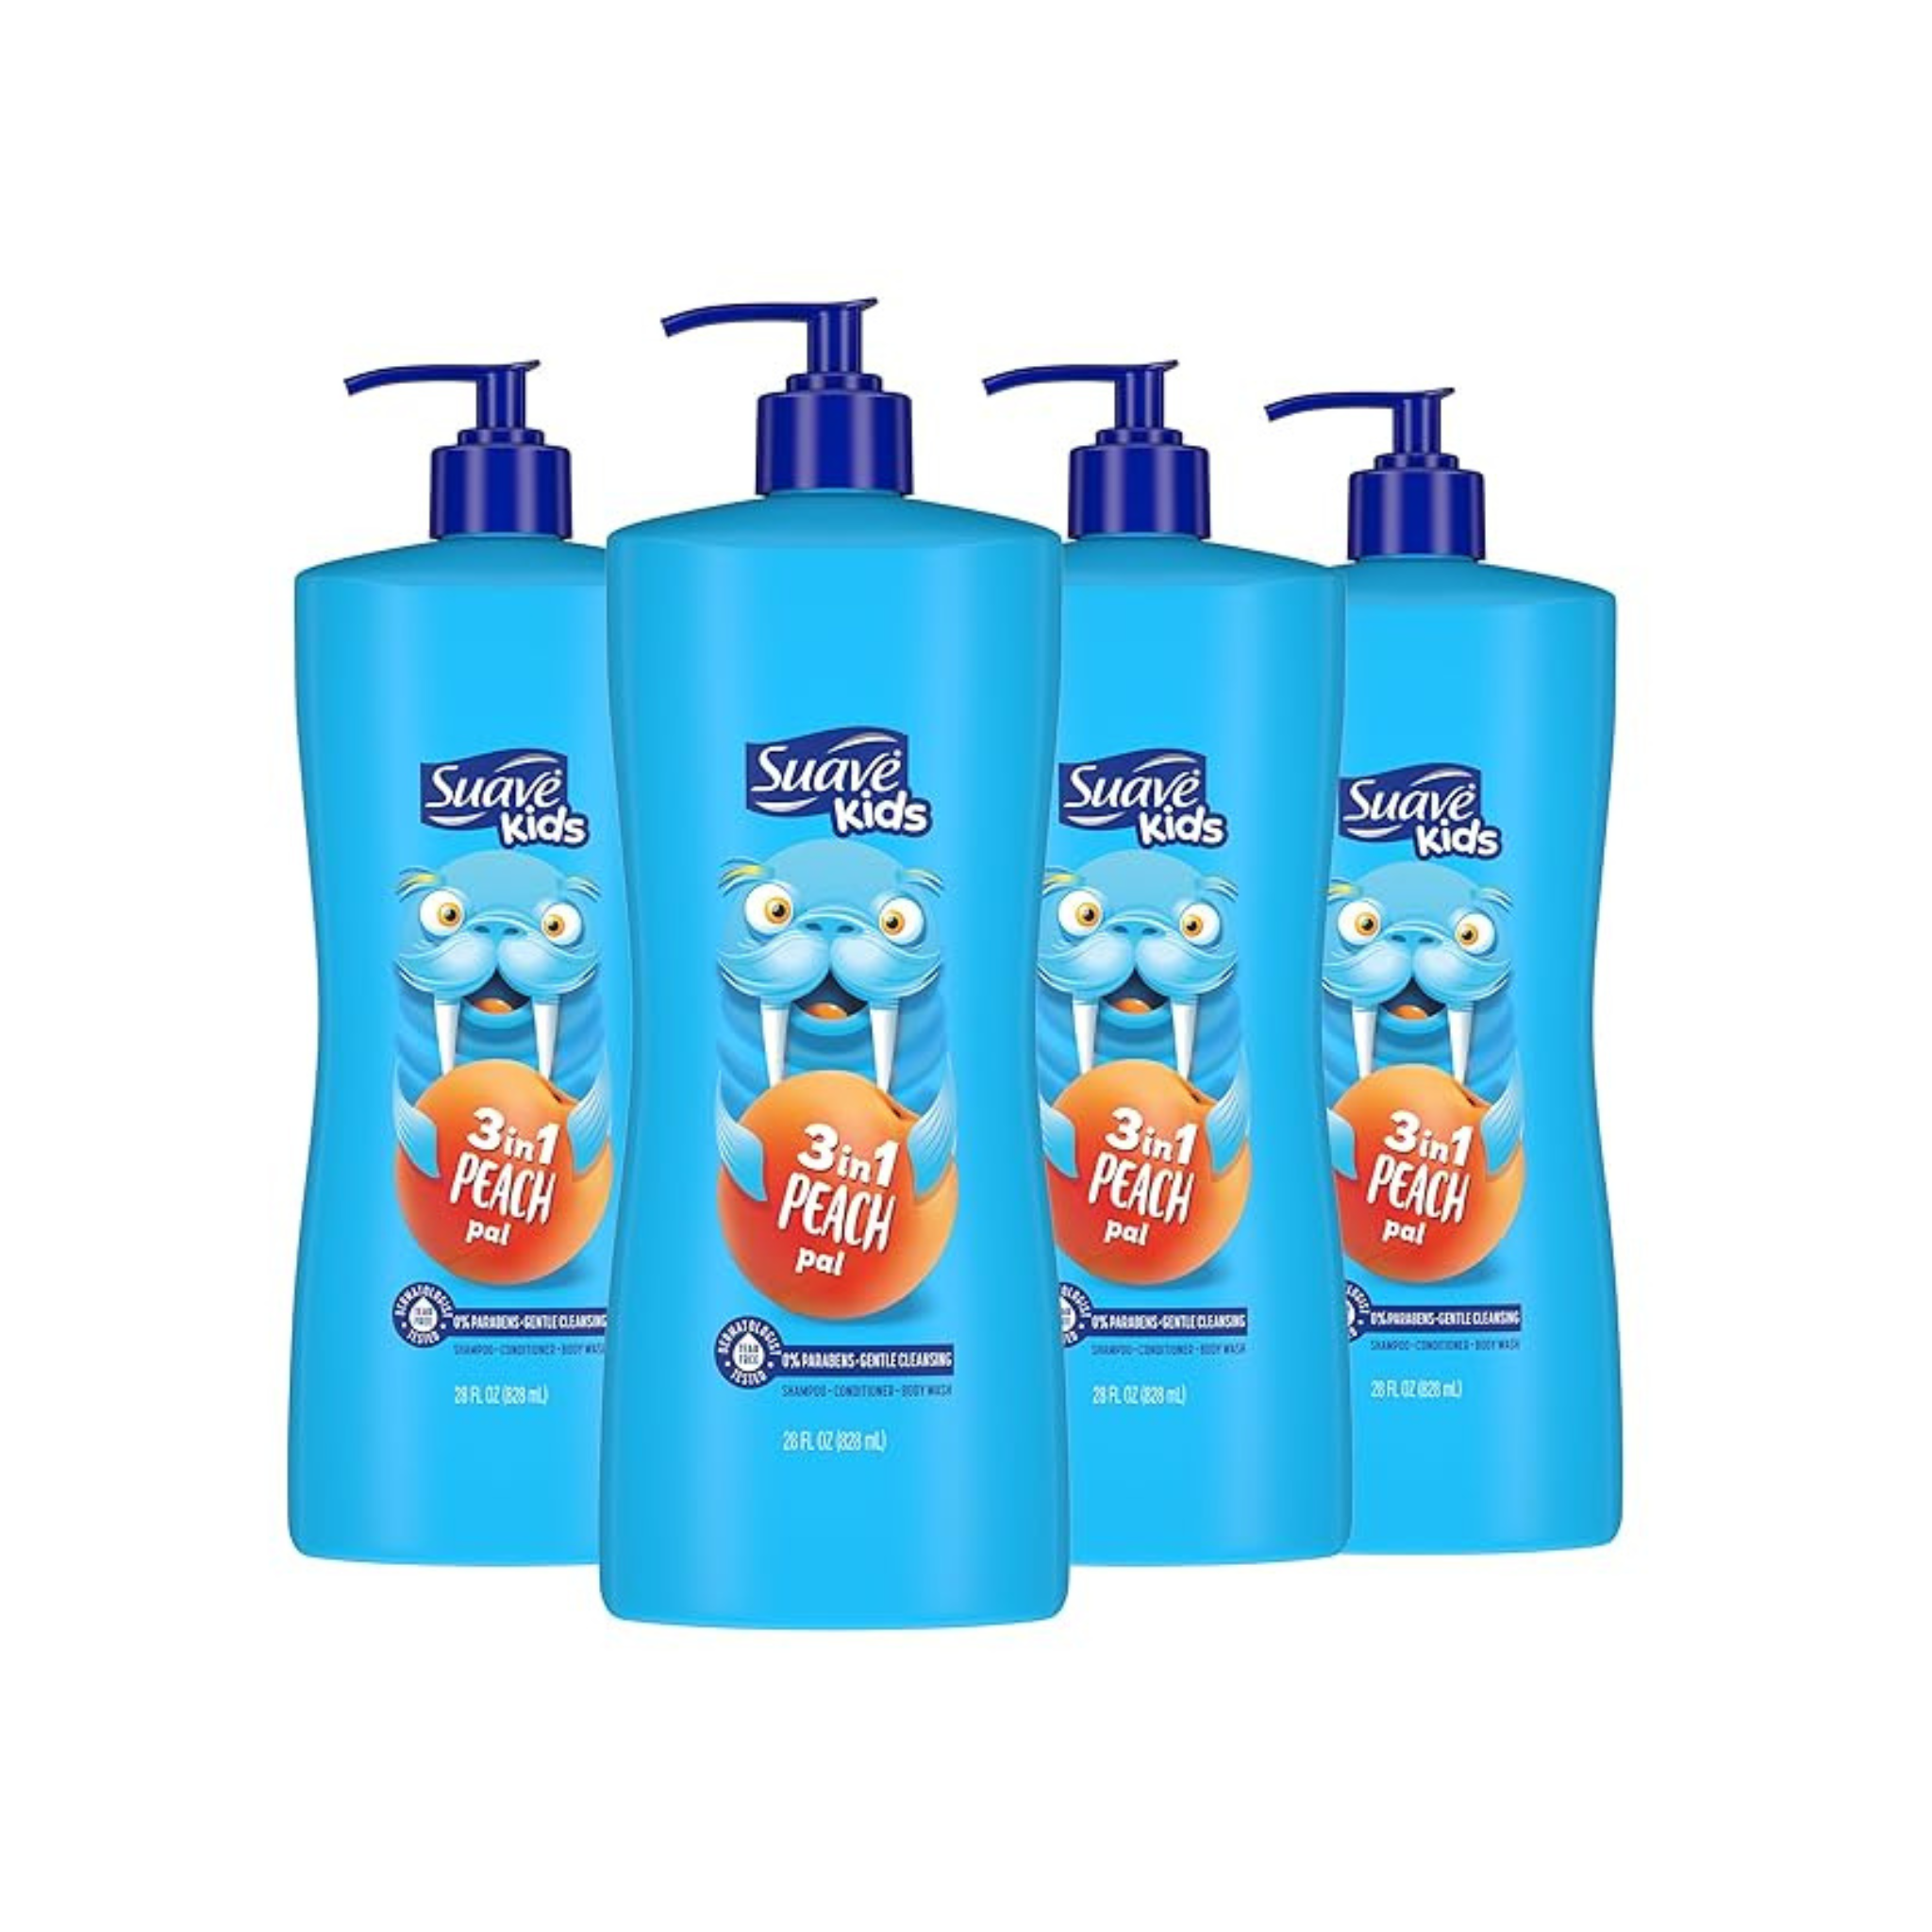 Suave Kids 3-in-1 Tear Free, Body Wash, Shampoo and Conditioners, 28 Oz, Pack of 4